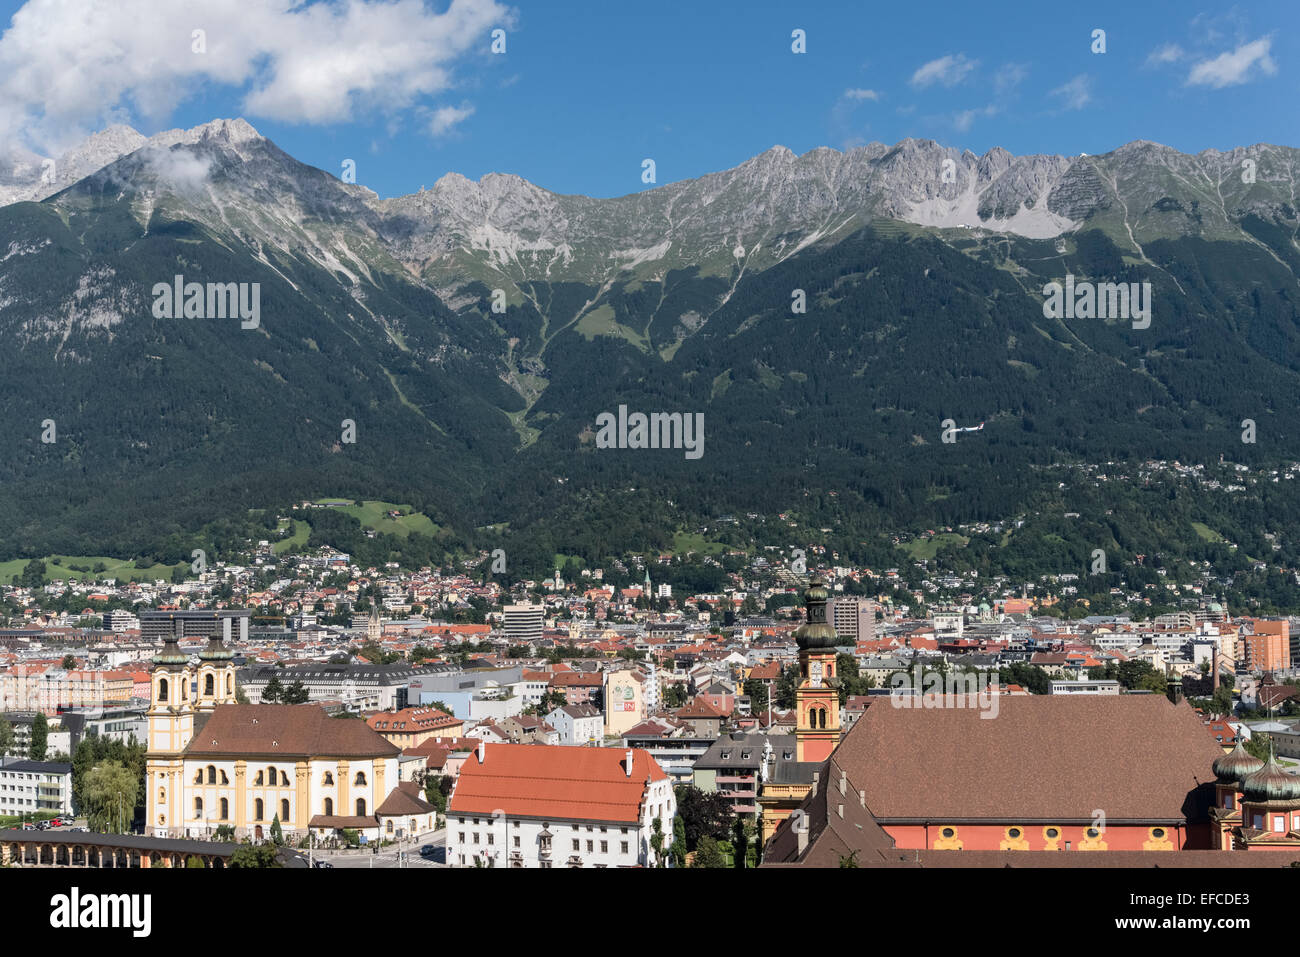 Innsbruck City Landscape elevated view Stock Photo